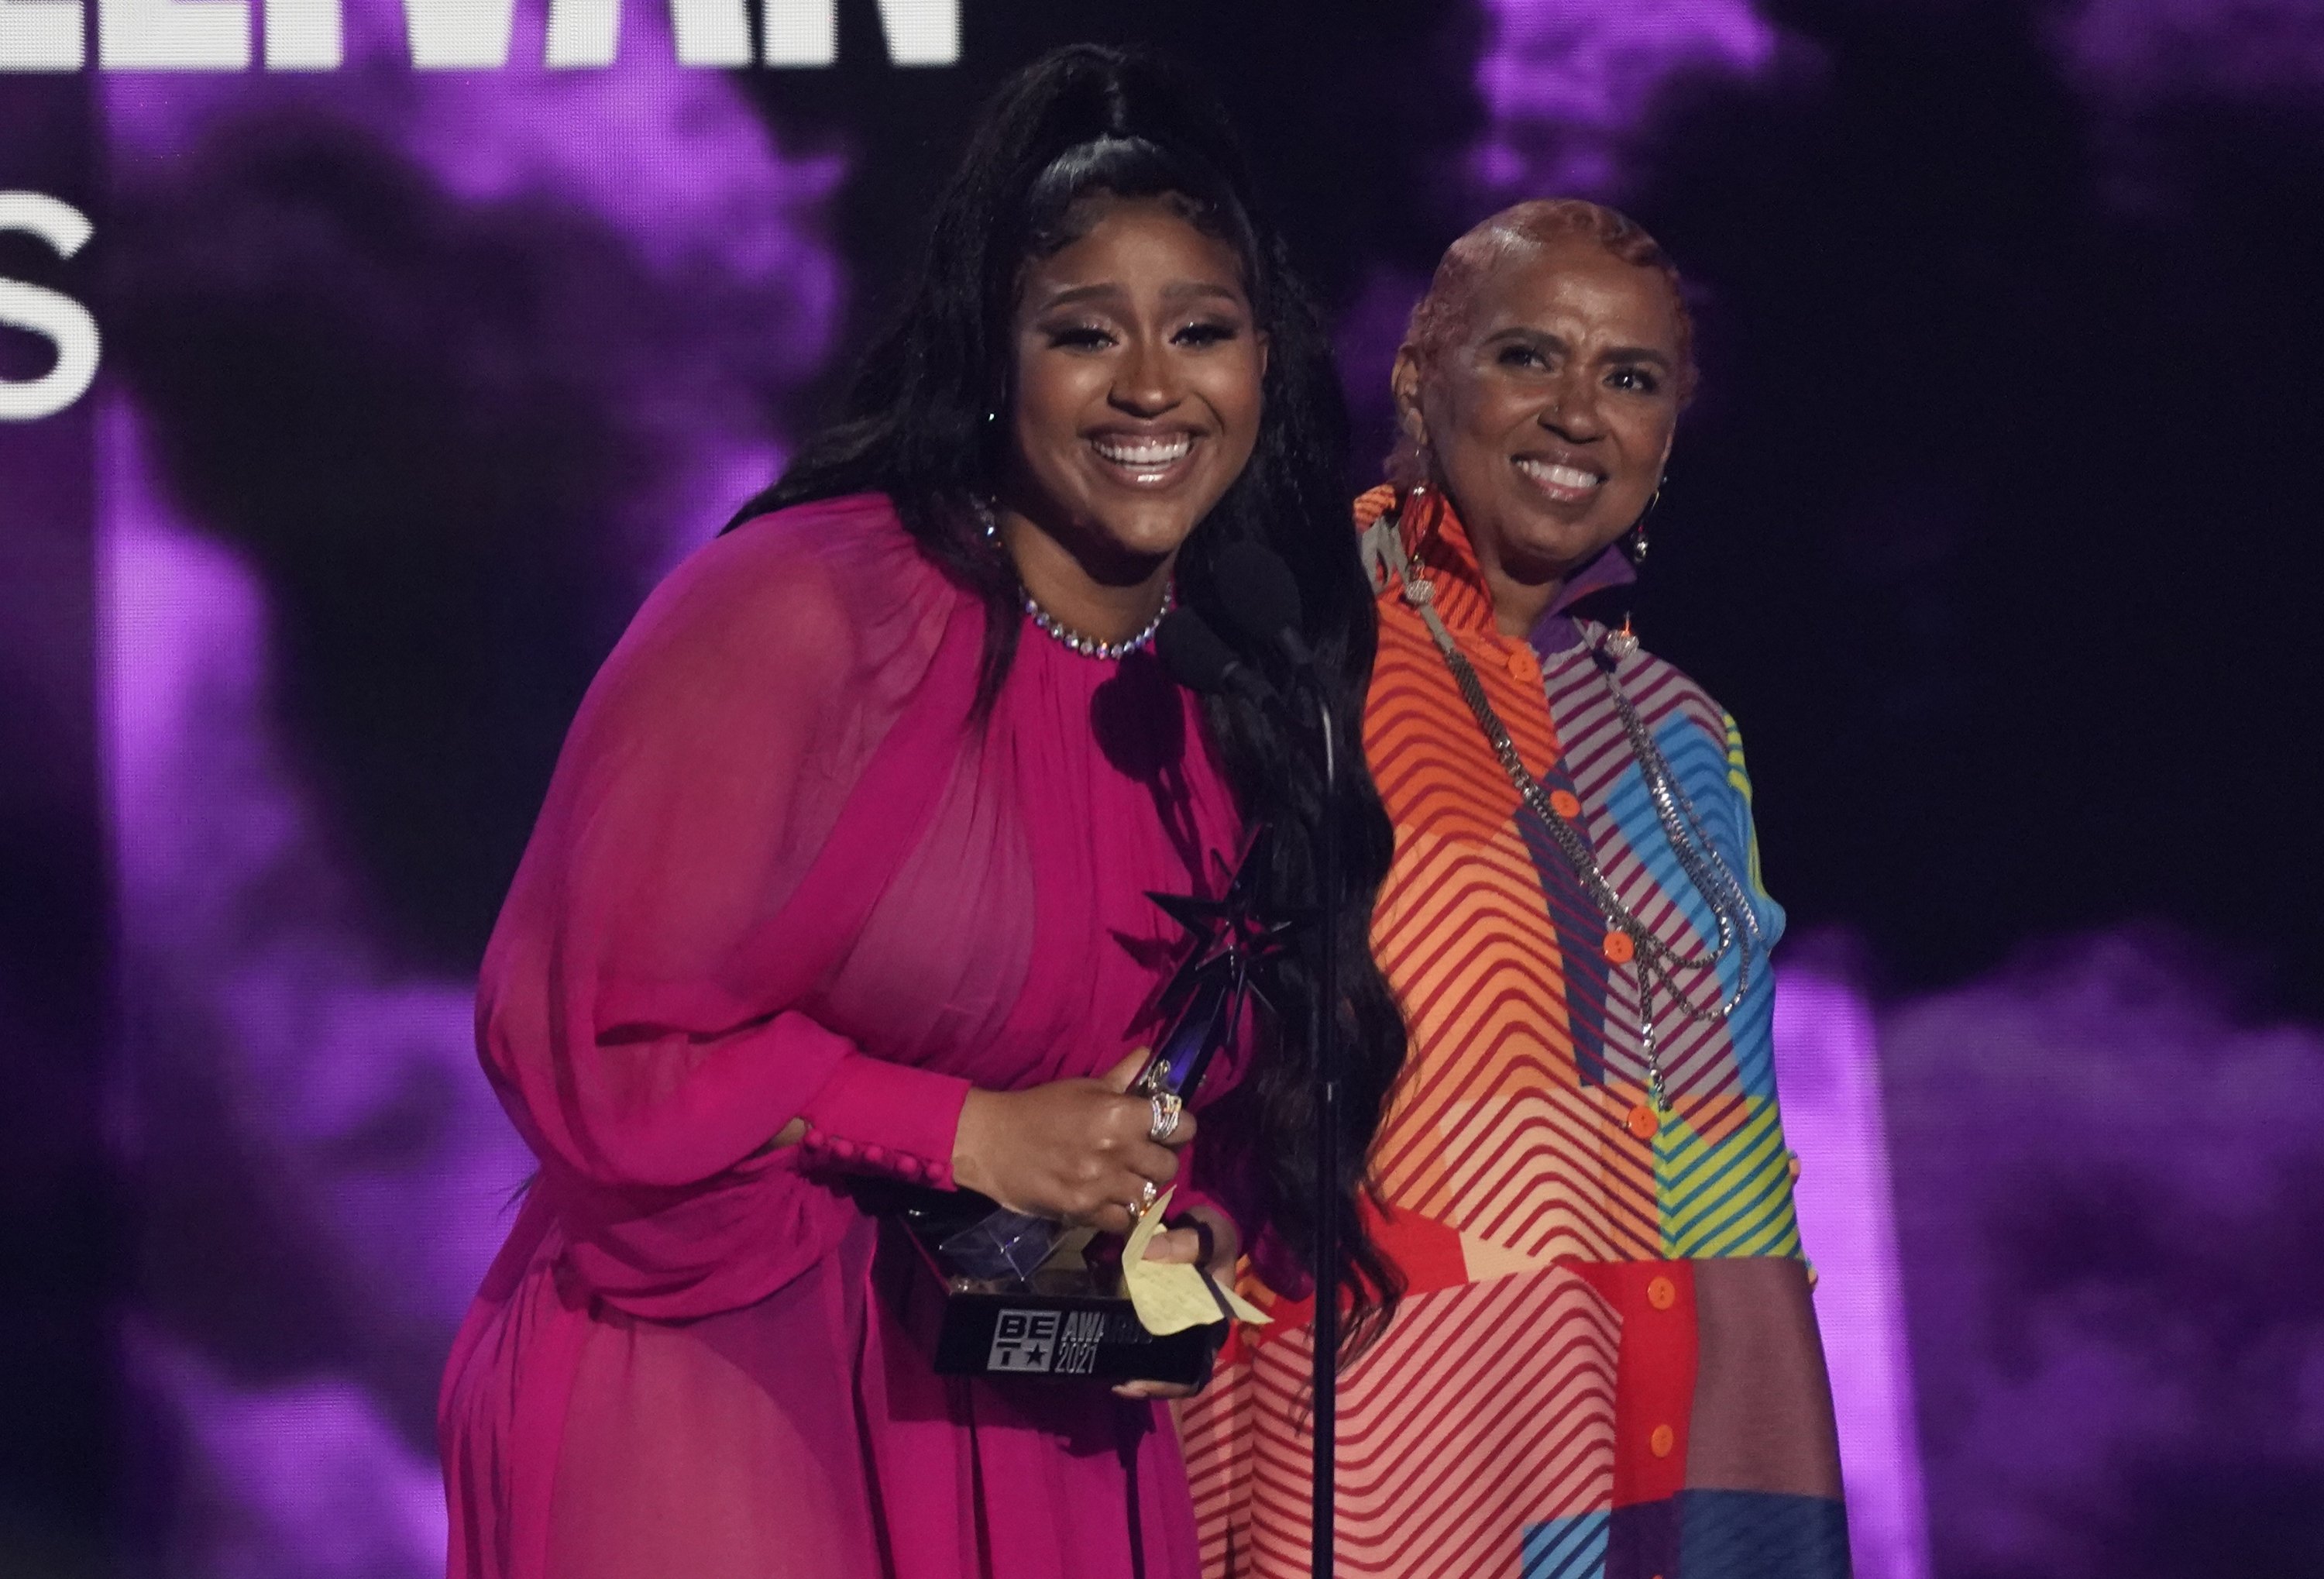 Jazmine Sullivan (L) accepts the album of the year award for "Heaux Tales" as her mother Pam Sullivan looks on, at the BET Awards at the Microsoft Theater in Los Angeles, U.S., June 27, 2021. (AP Photo)